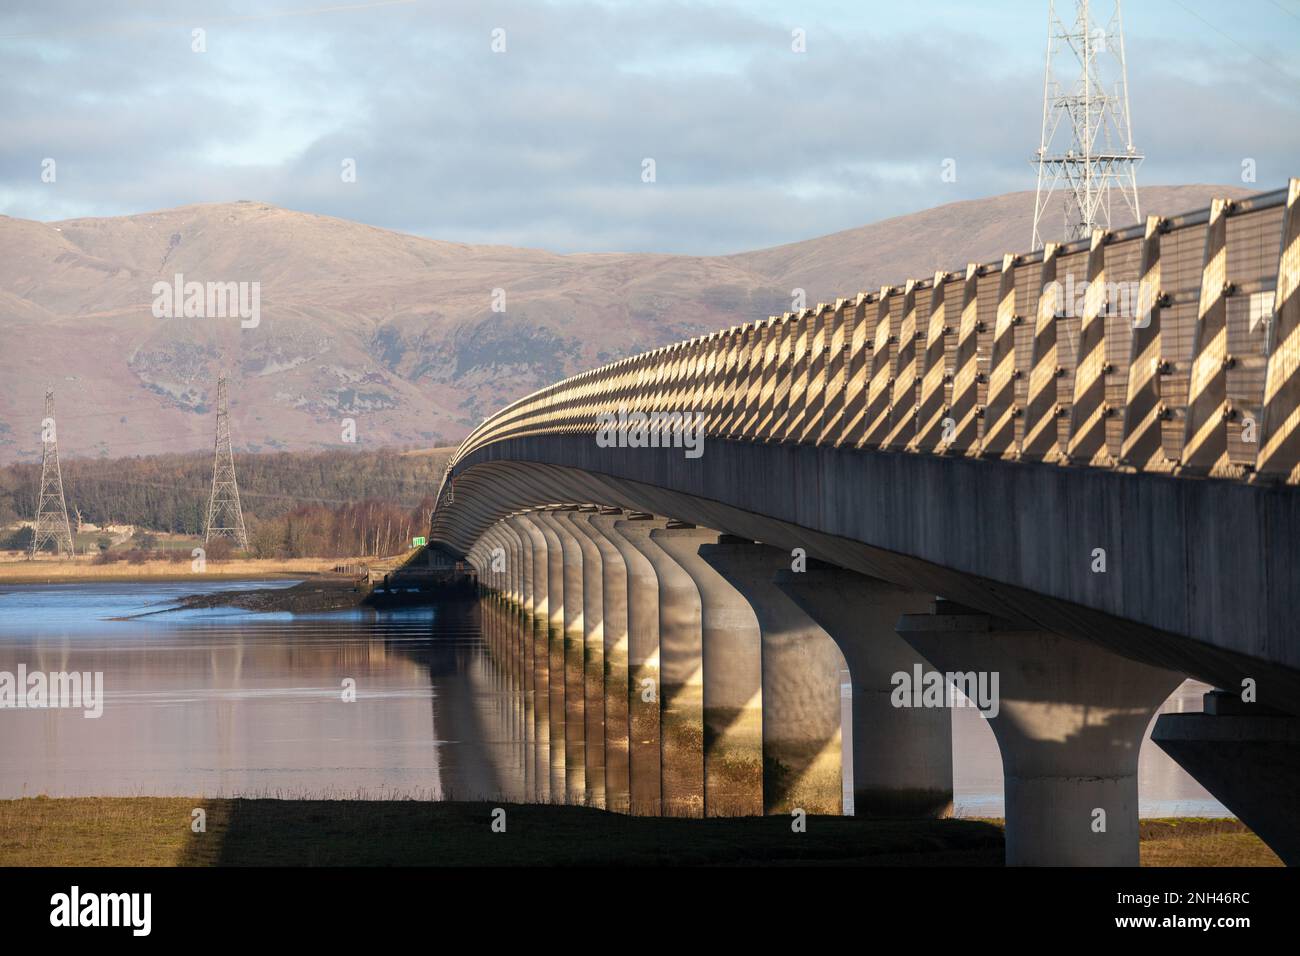 Clackmannanshire Bridge over the Firth of Forth in Scotland which opened to traffic on 19 November 2008 Stock Photo